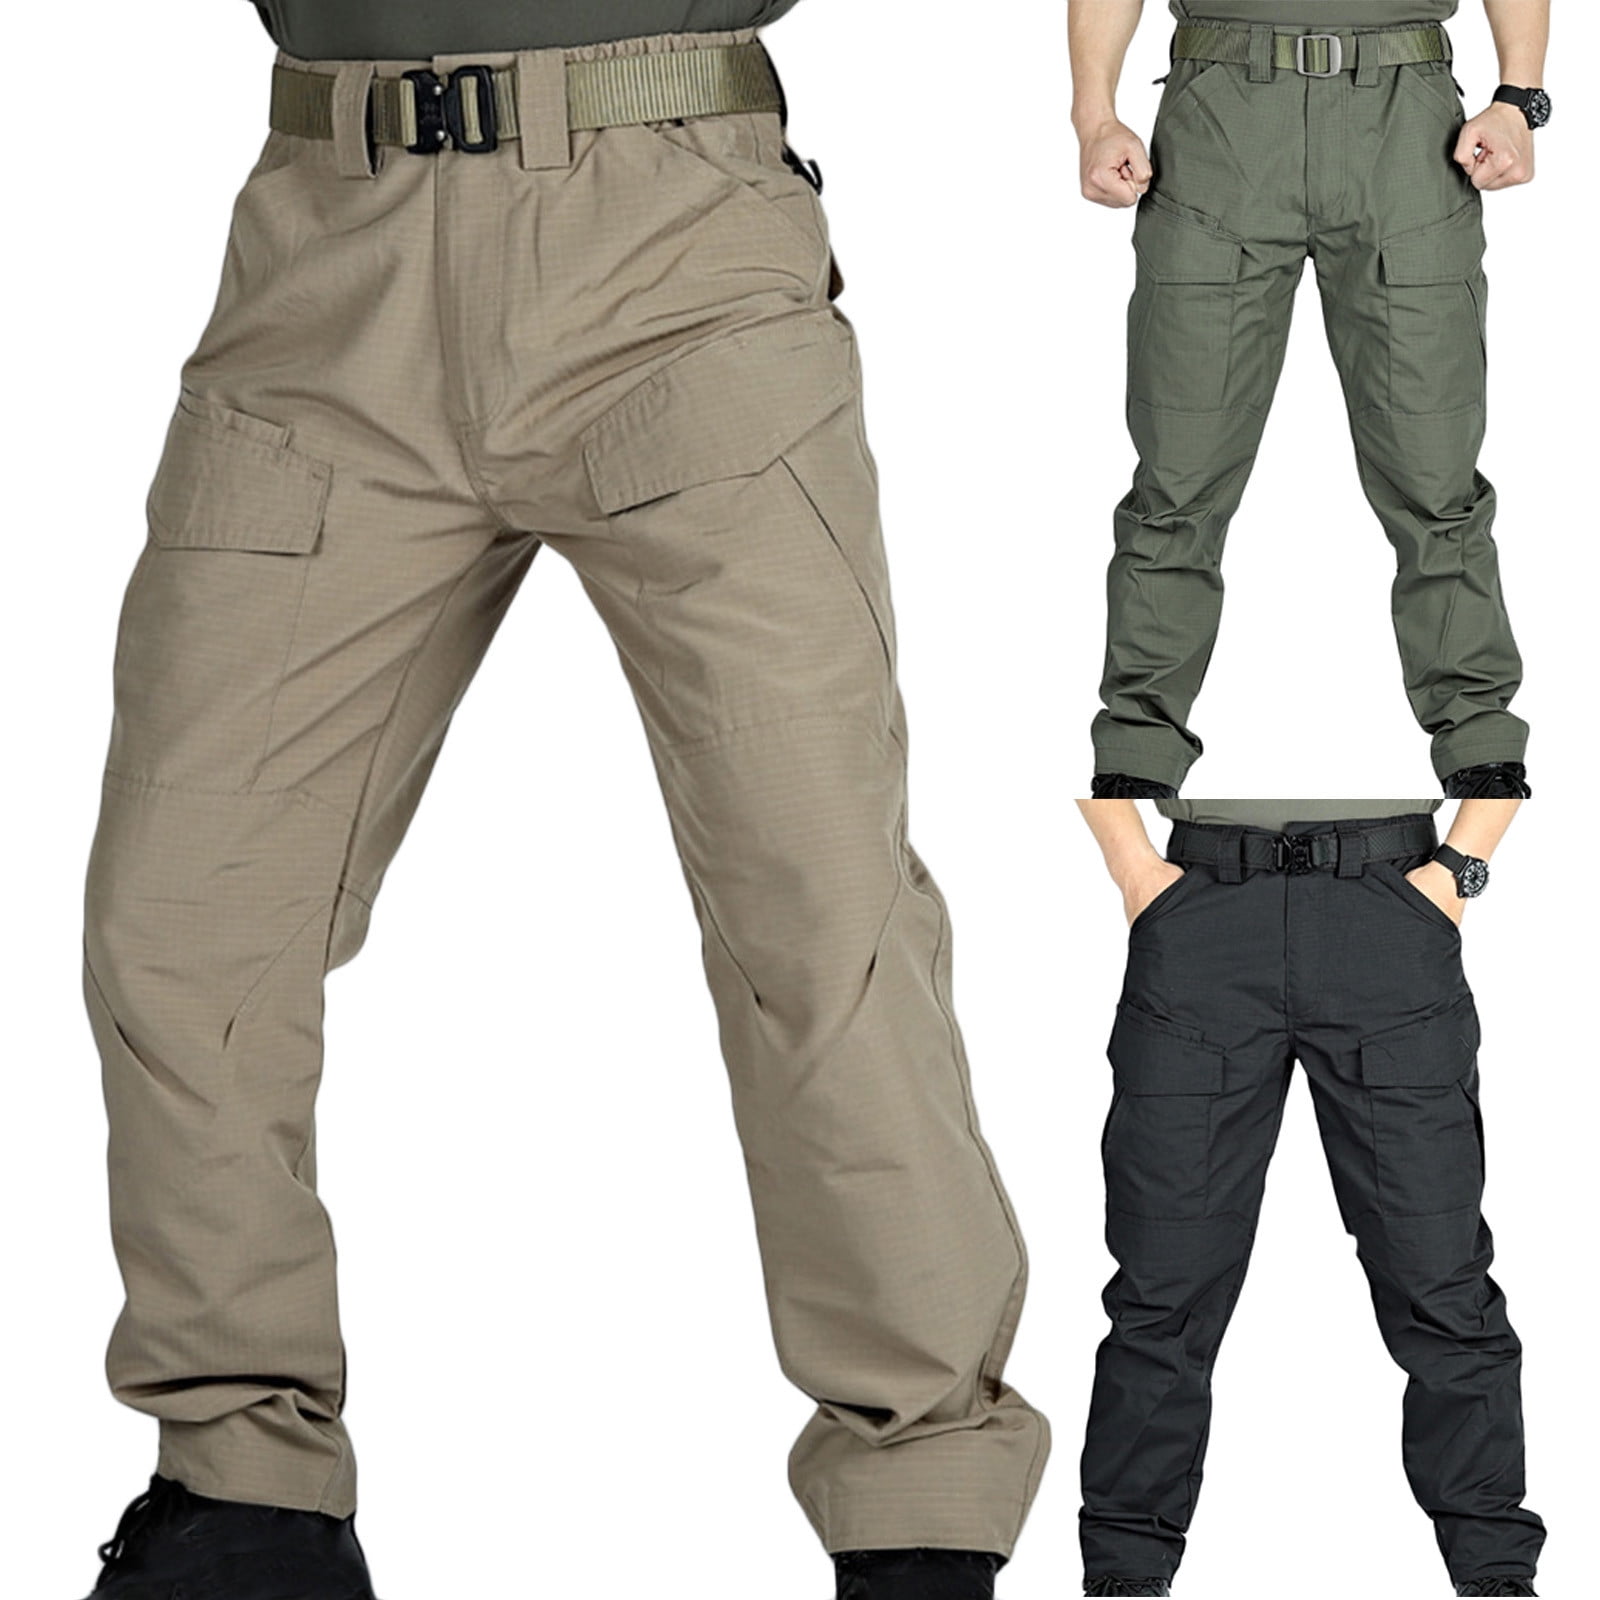 Symoid Cargo Pants for Men Multi Pocket Fall and Winter Christmas Gift ...